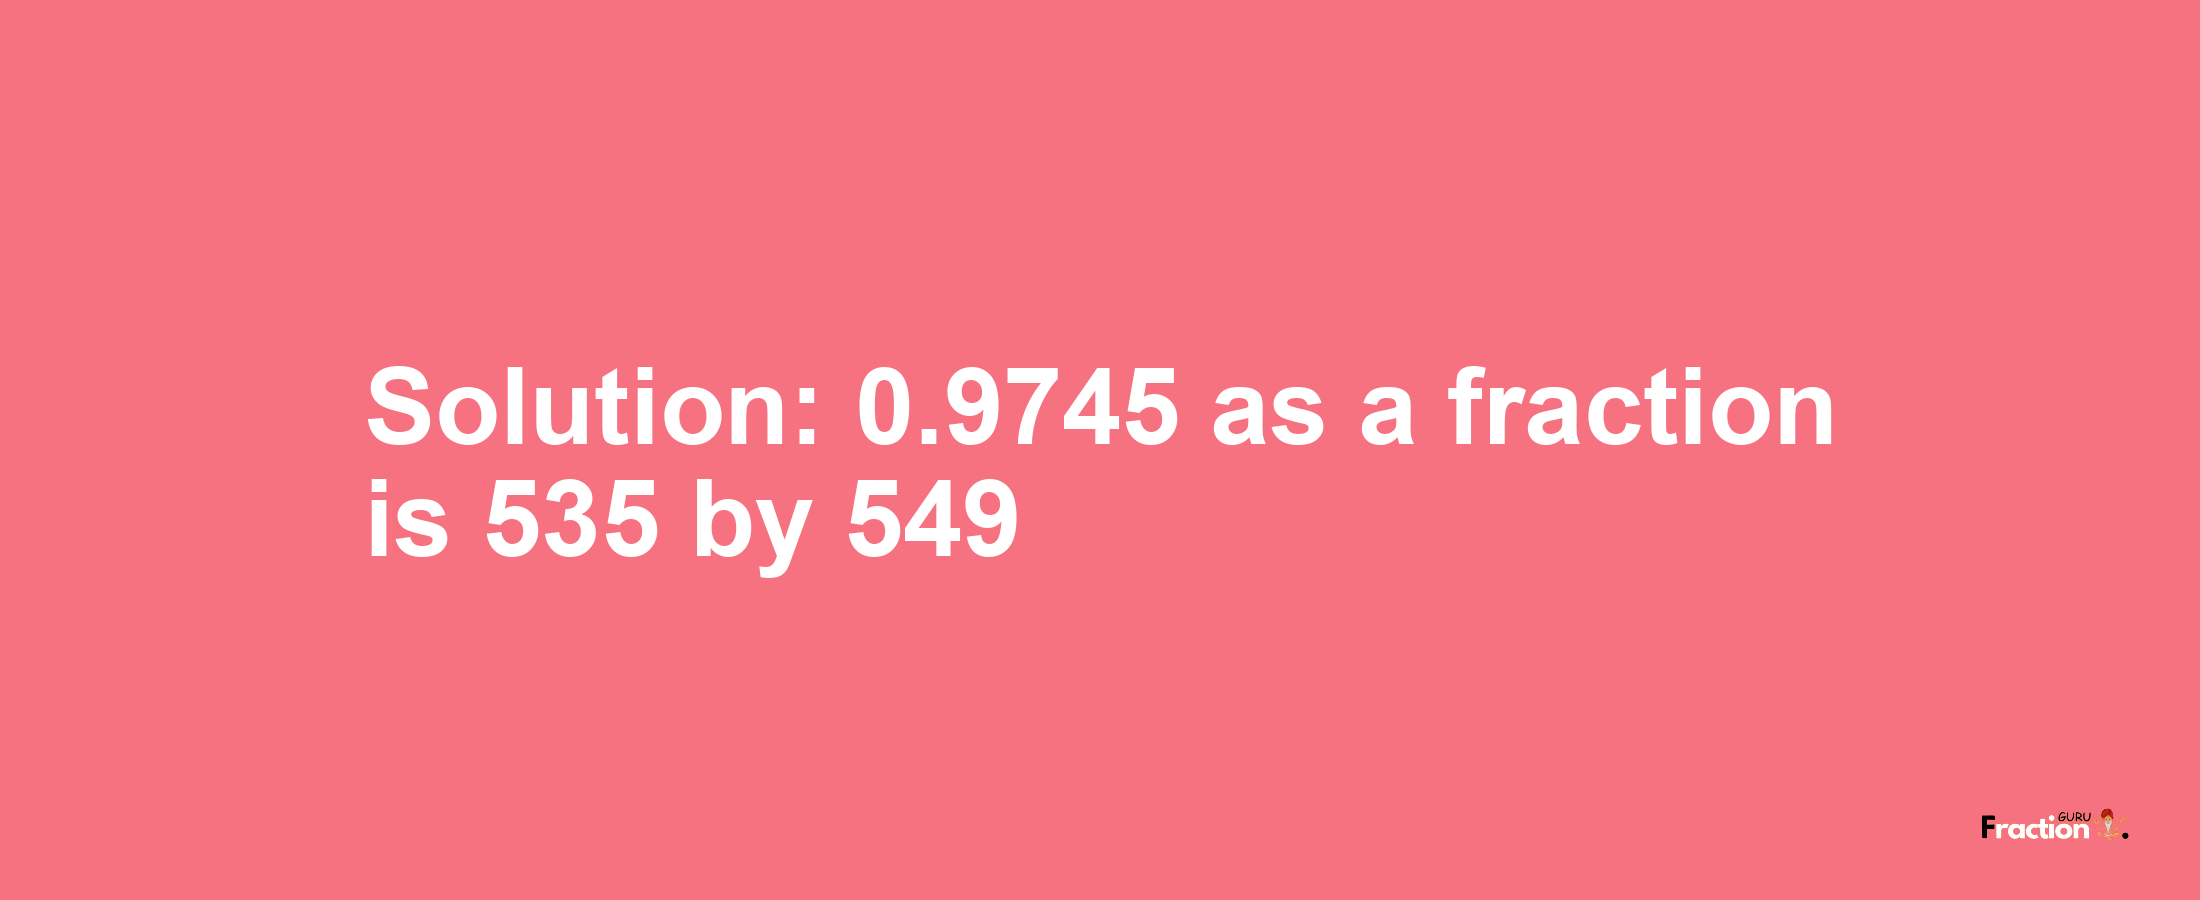 Solution:0.9745 as a fraction is 535/549